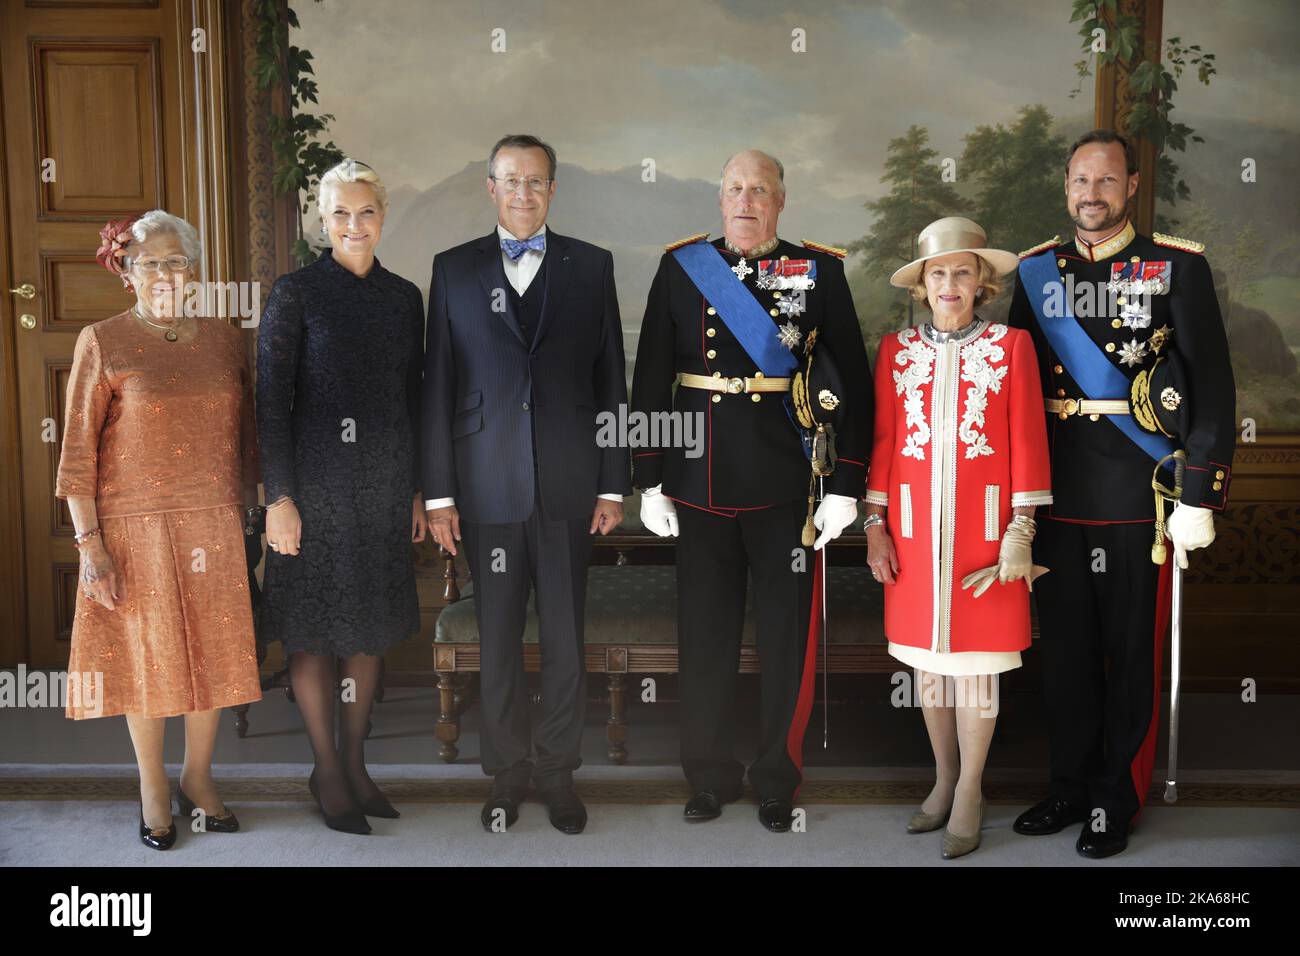 OSLO 20140902. Estonian president Toomas Hendrik Ilves arrived for a one-day state visit to Norway Tuesday September 2, 2014. He was received in the Royal Palace in Oslo. From left: Princess Astrid, Mrs Ferner, Crown Princess Mette-Marit, Estonian President Toomas Hendrik Ilves, King Harald, Queen Sonja and Crown Prince Haakon. Photo: Berit Roald /  Stock Photo